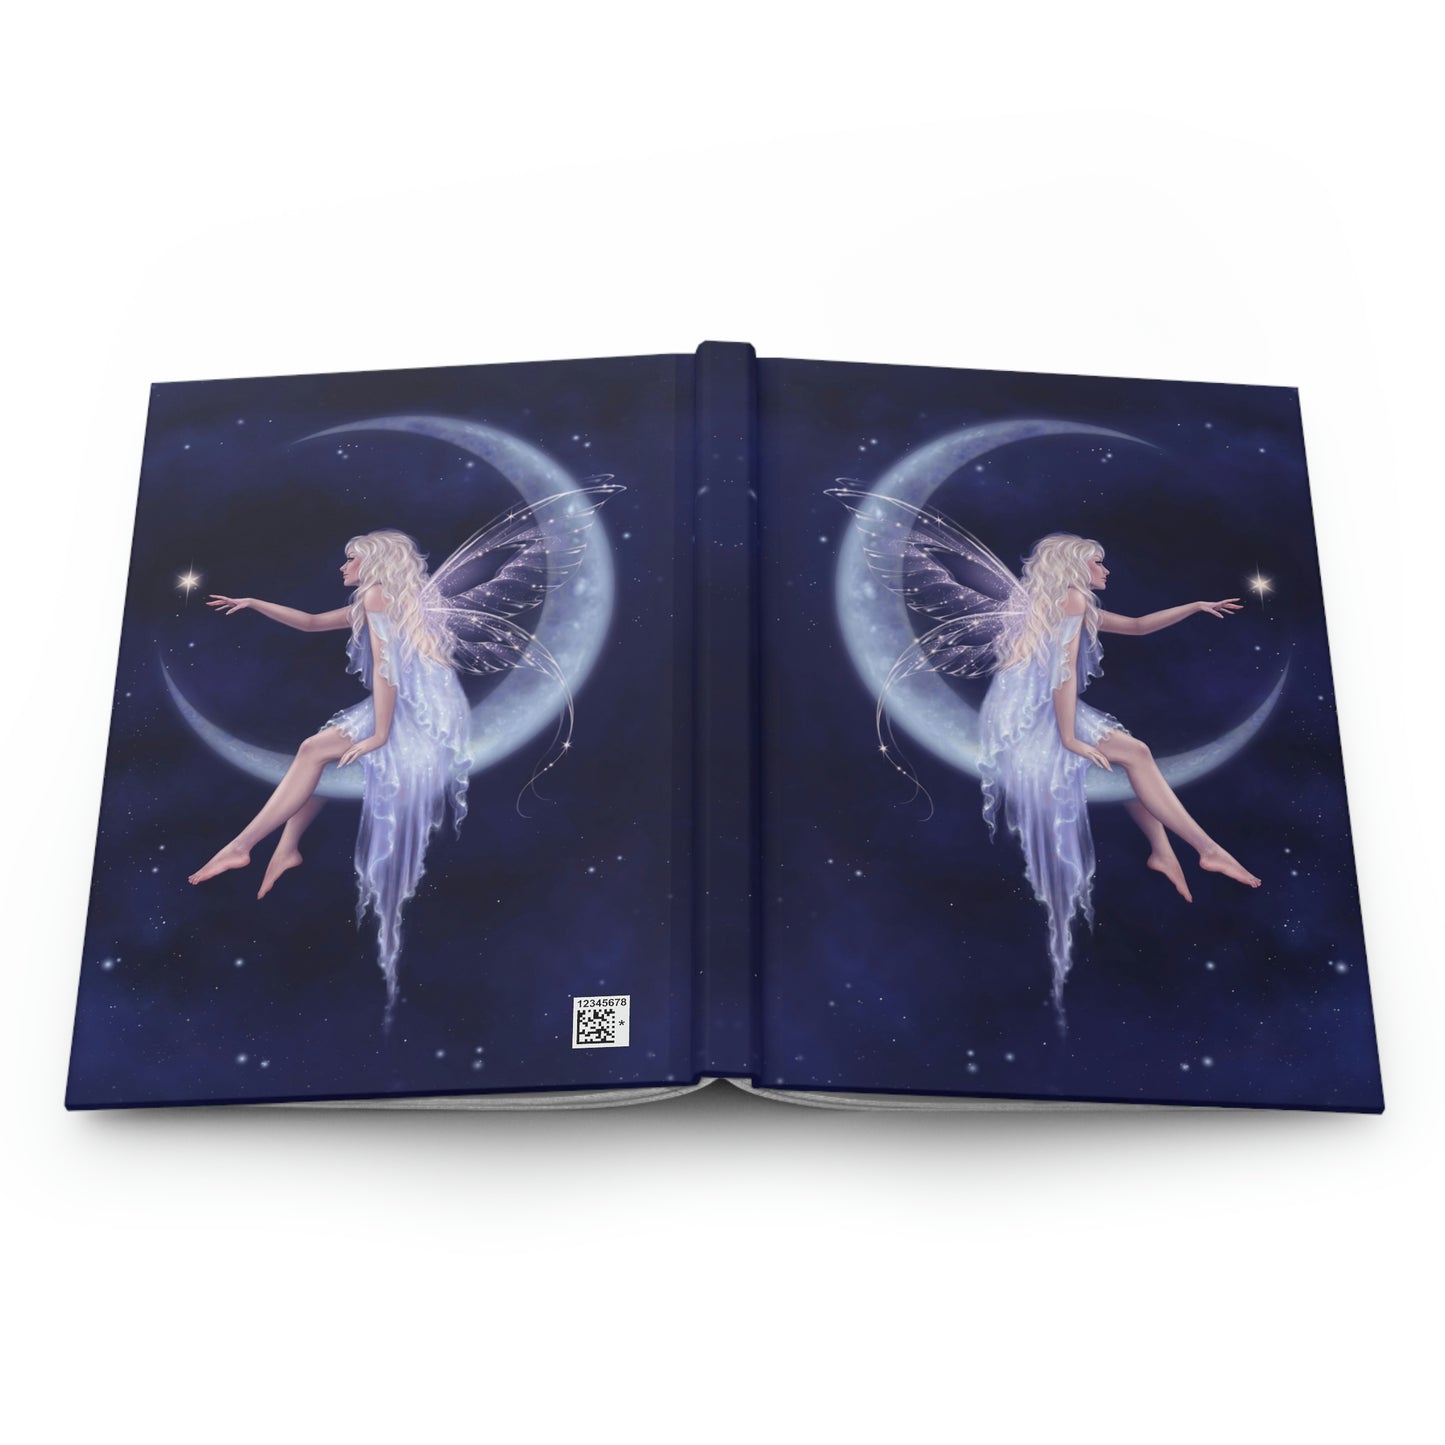 Hardcover Journal - Birth of a Star